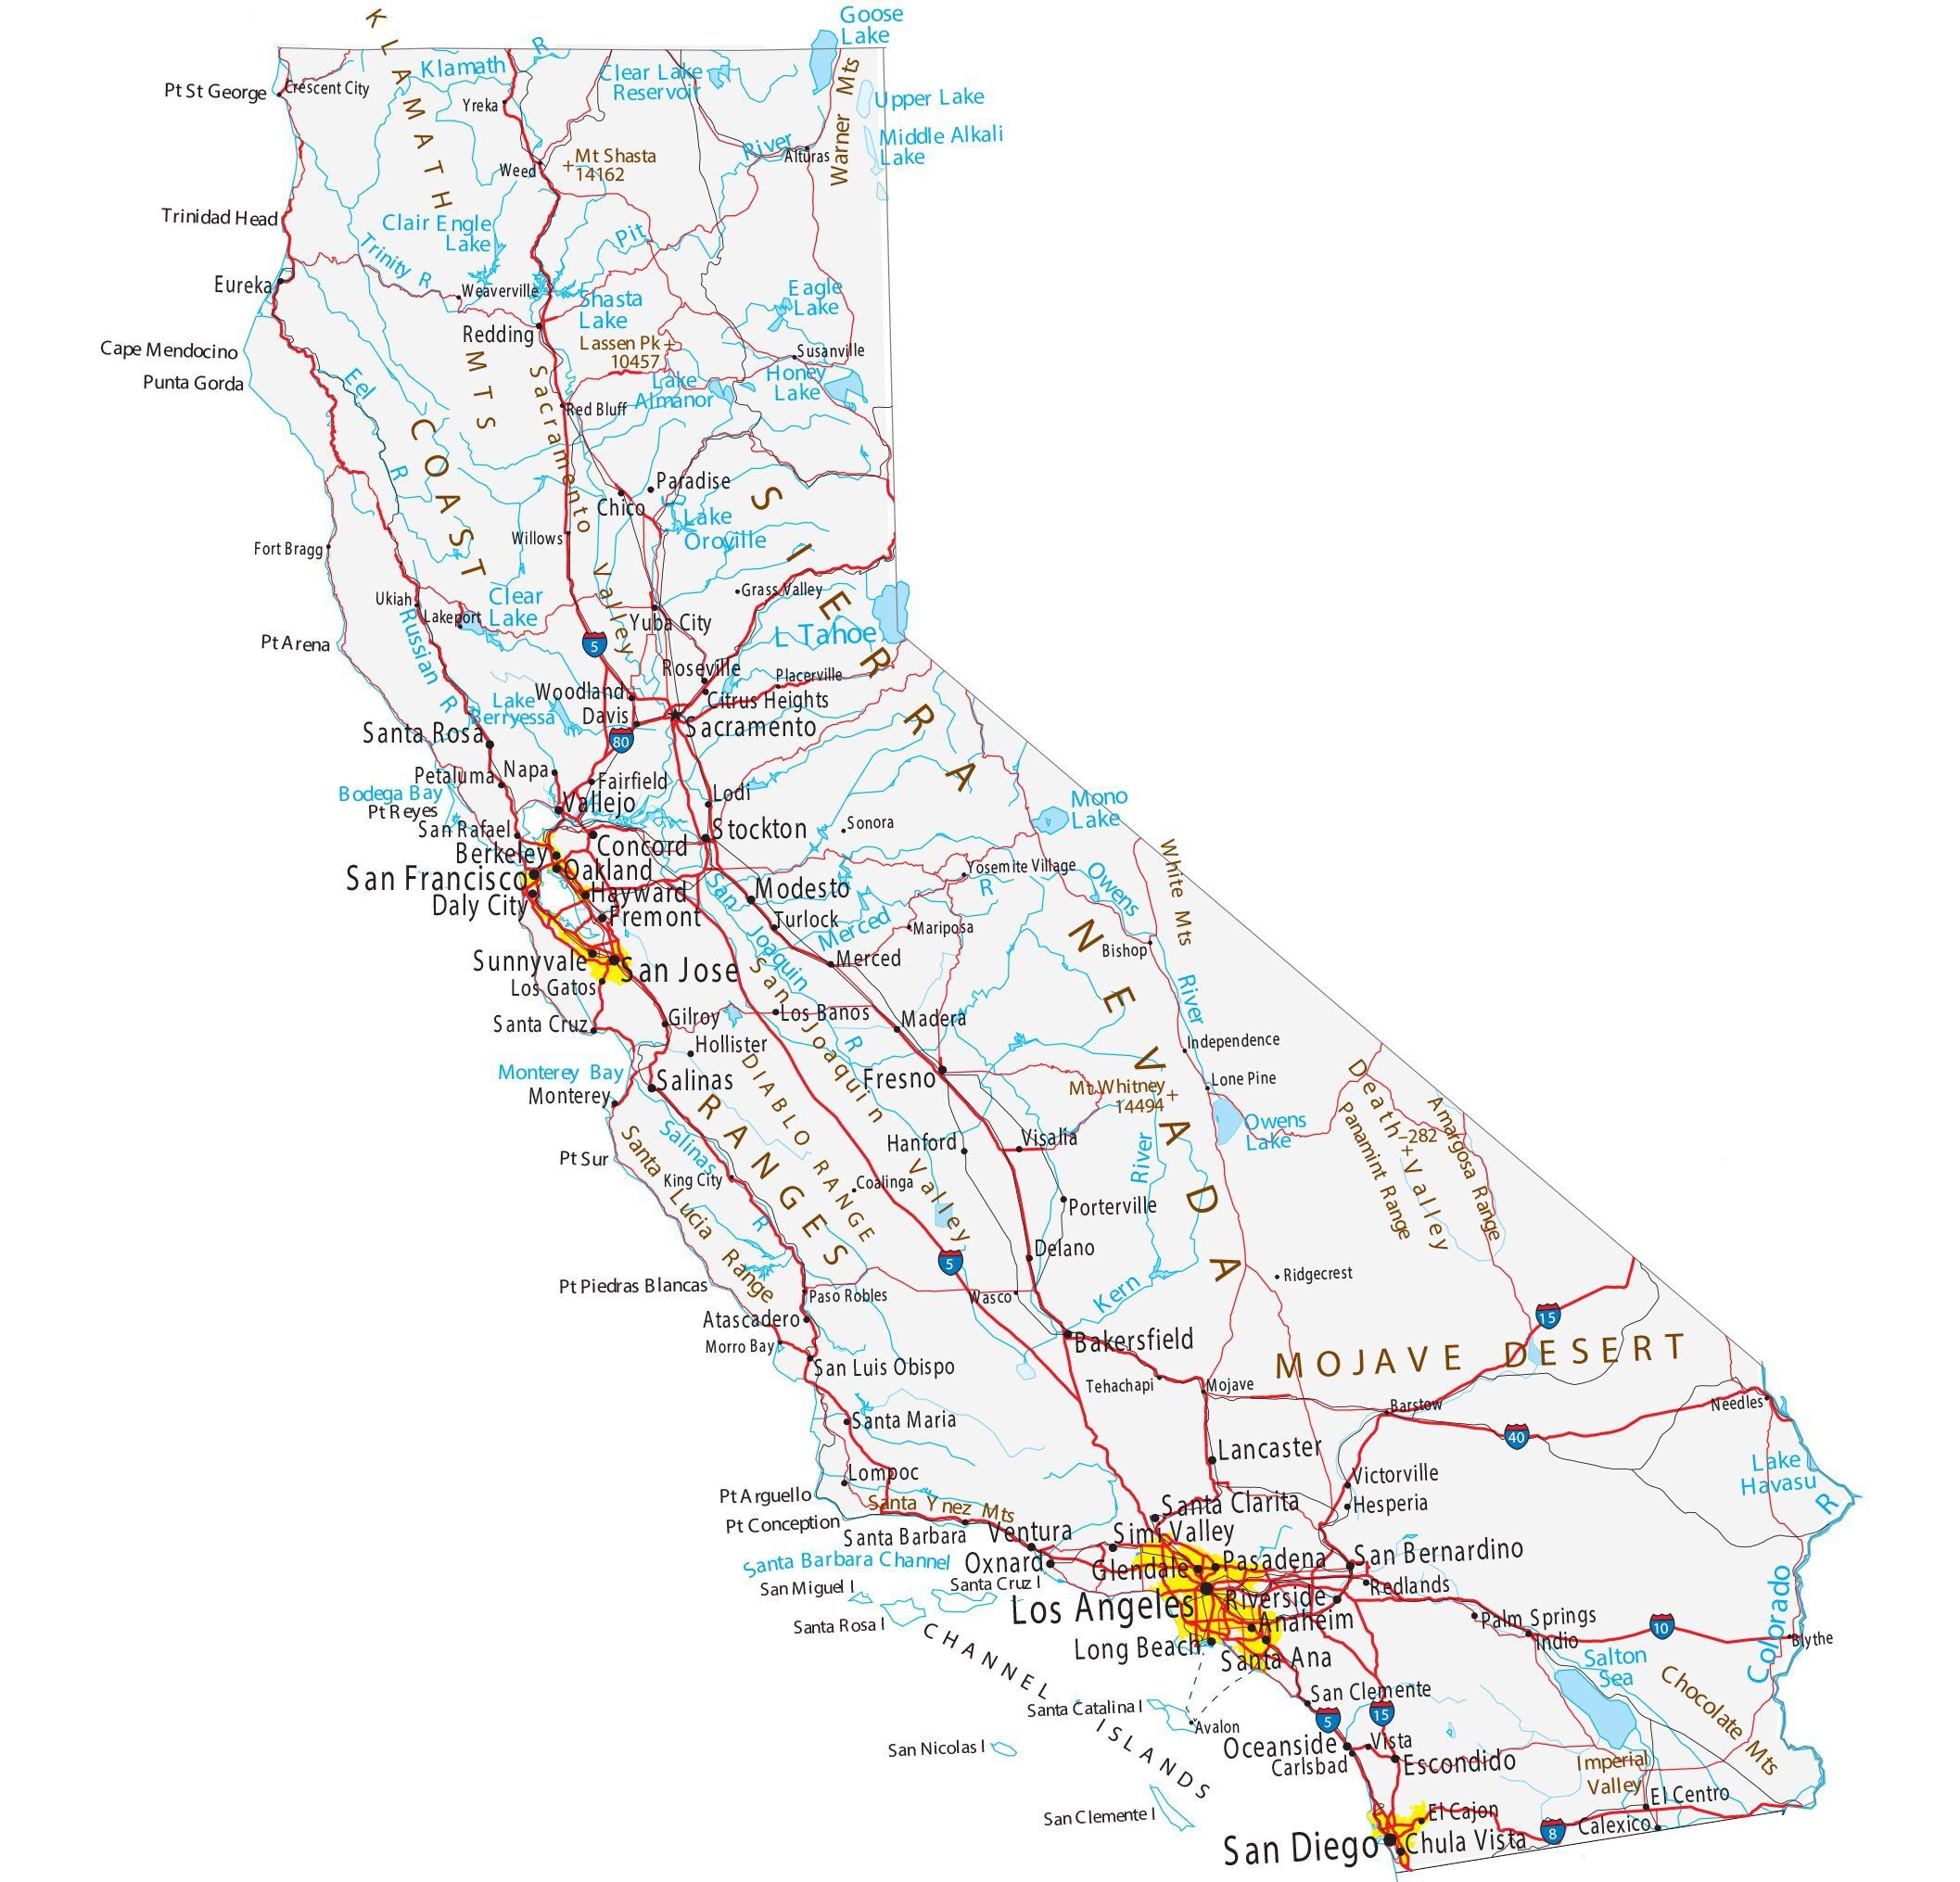 Map of California - Cities and Highways - GIS Geography